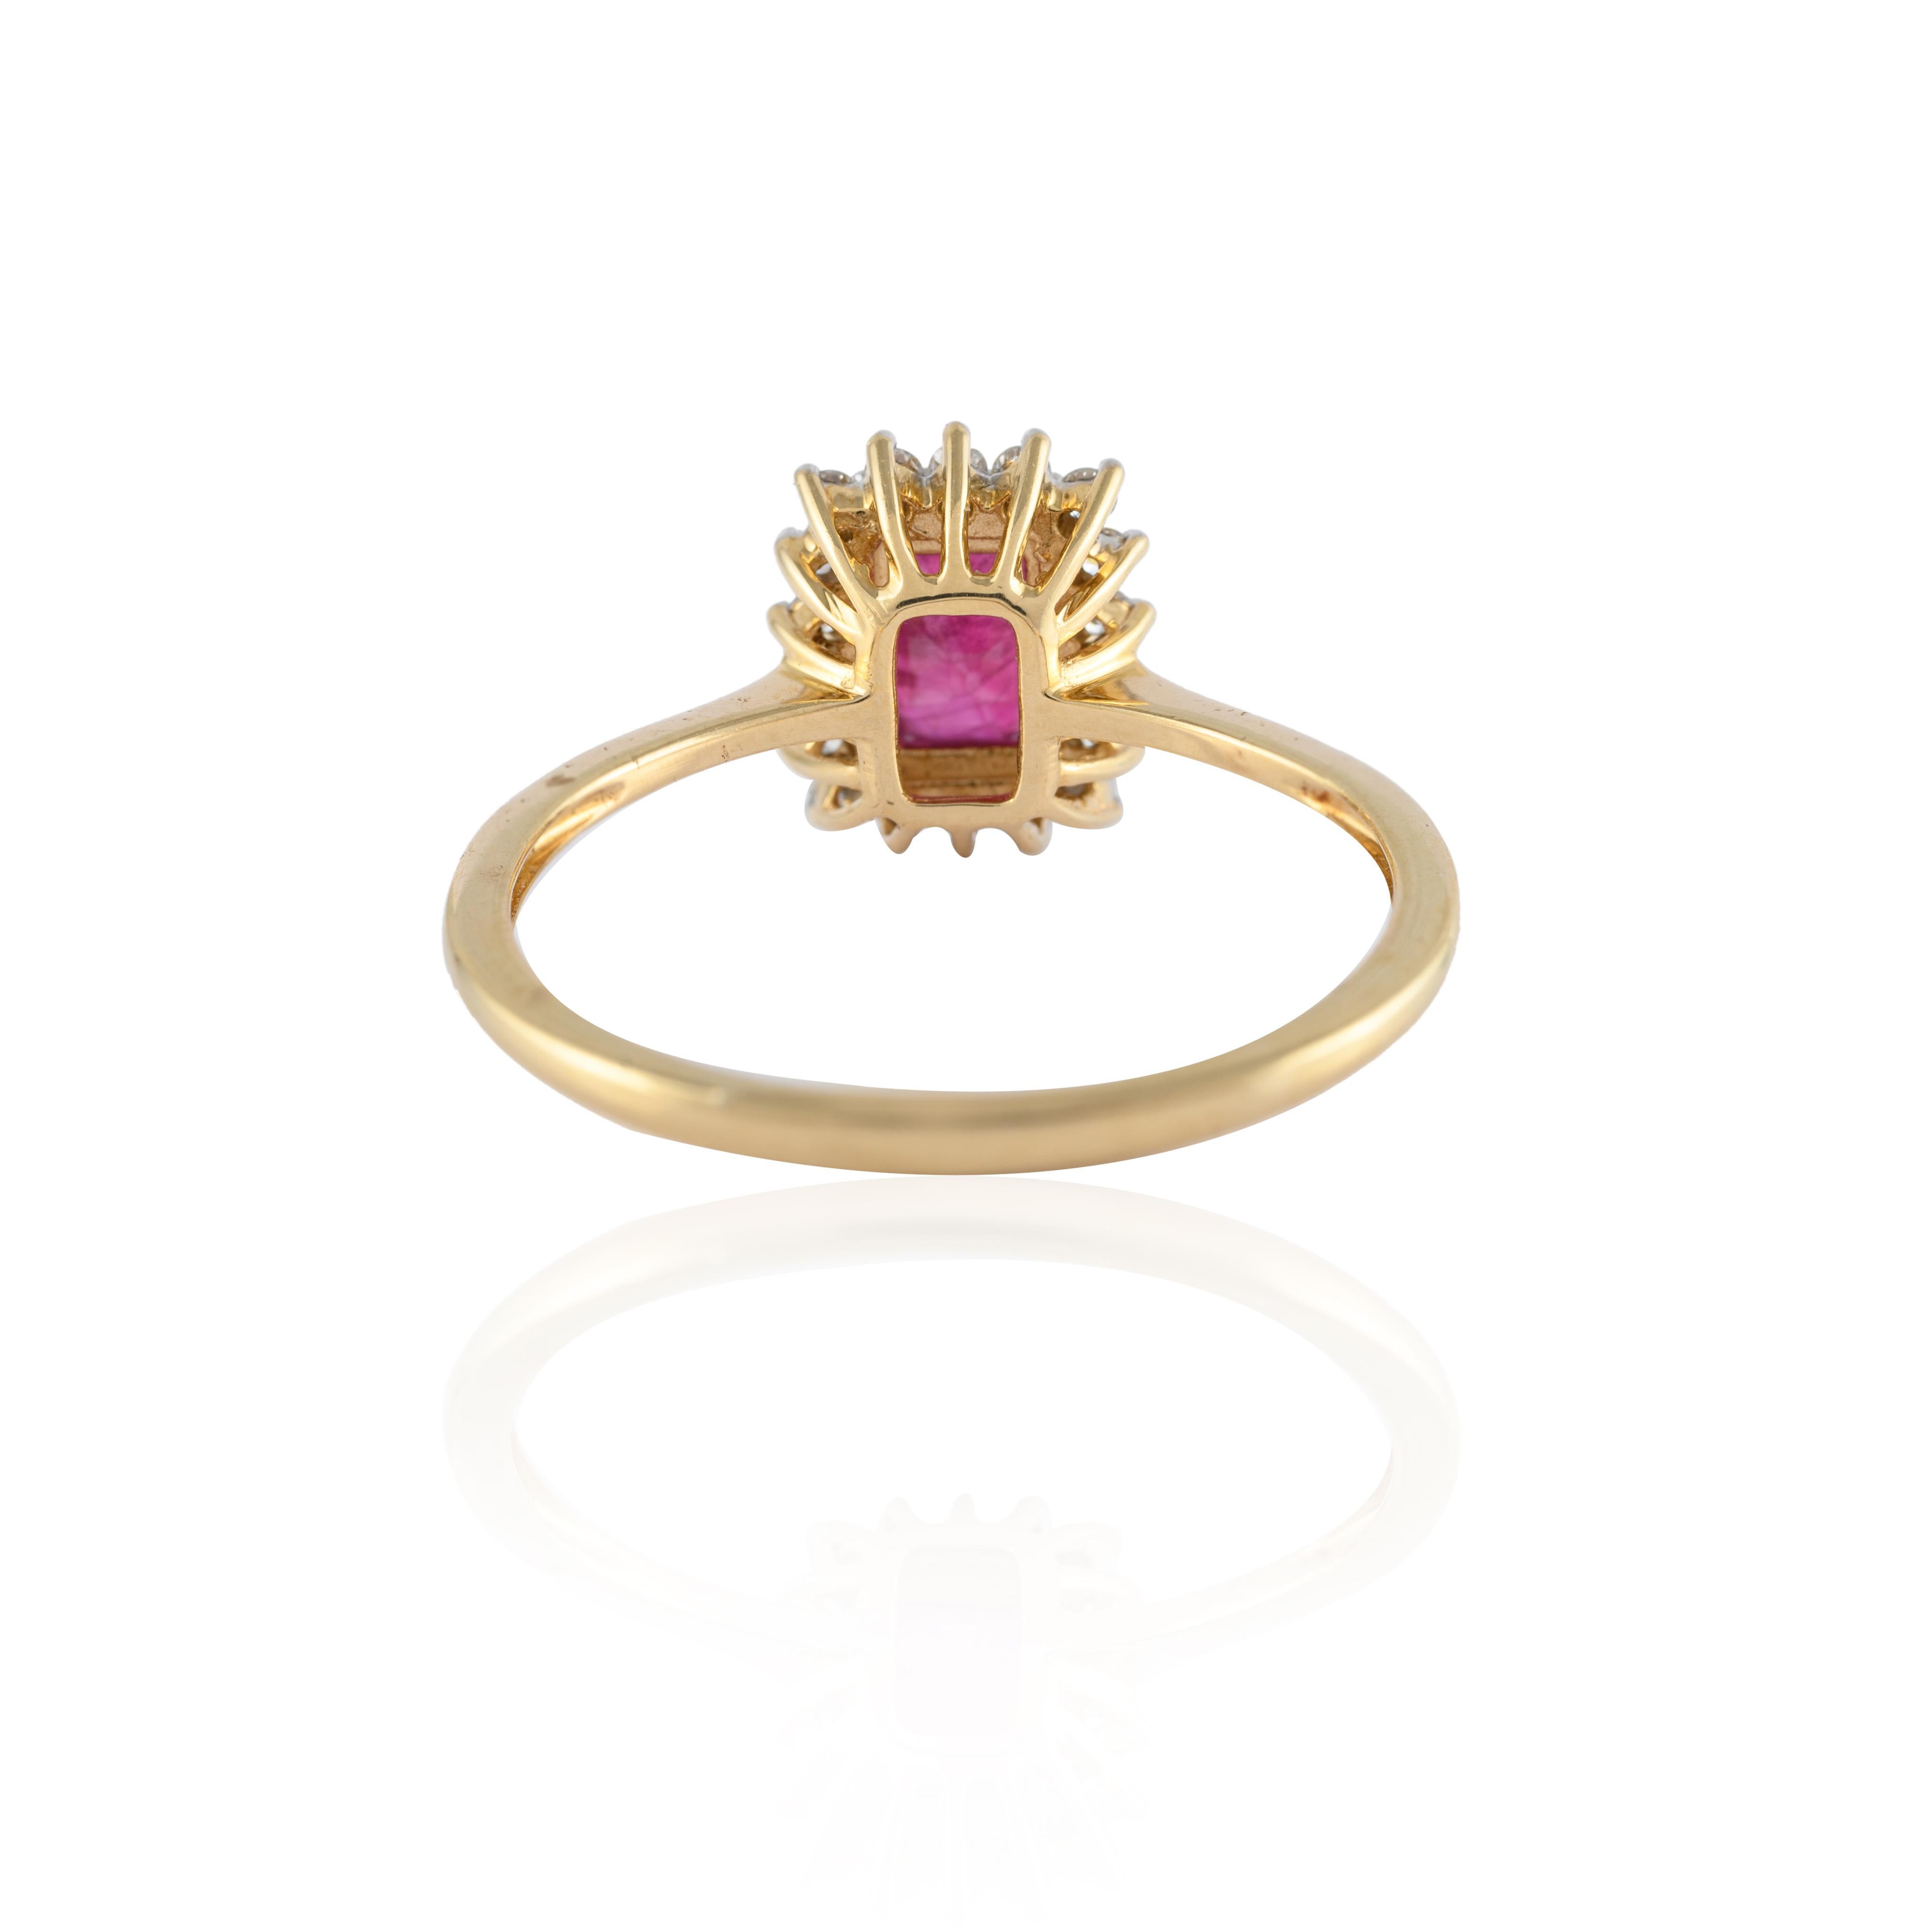 For Sale:  Genuine Octagon Cut Halo Diamond Ruby Ring in 14k Solid Yellow Gold 4